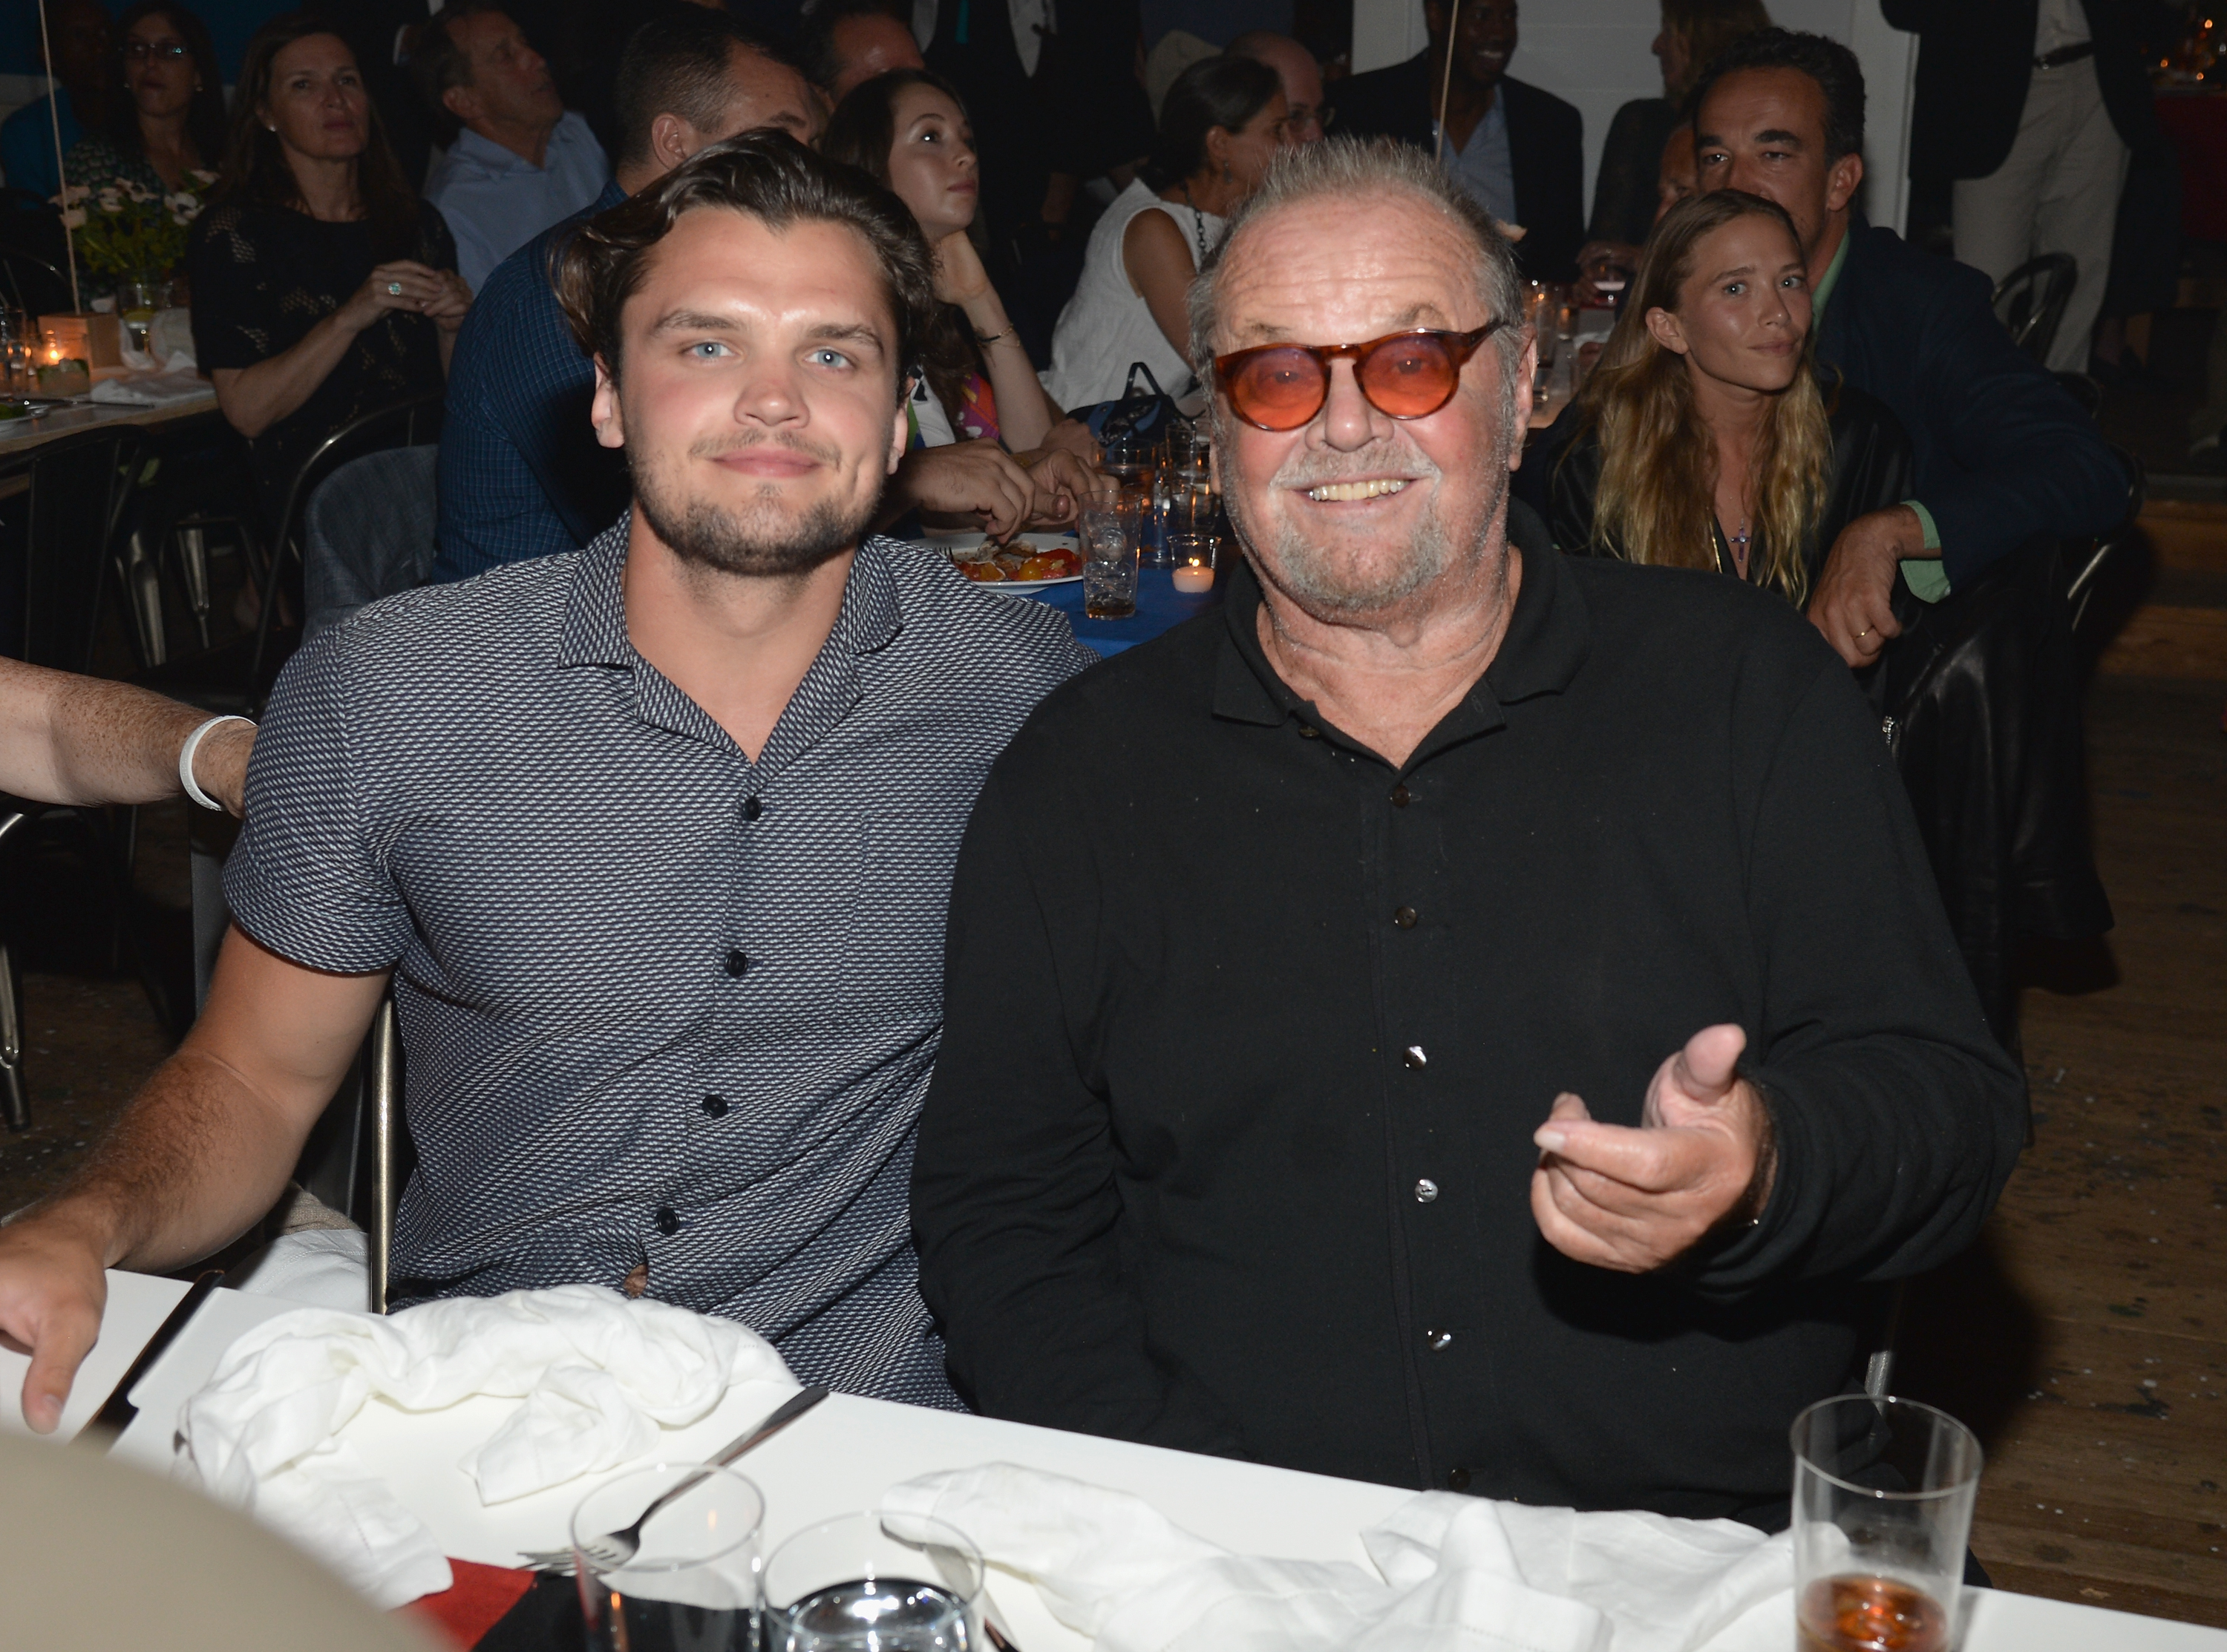 Ray Nicholson and Jack Nicholson at the Apollo in the Hamptons in East Hampton, New York on August 15, 2015 | Source: Getty Images